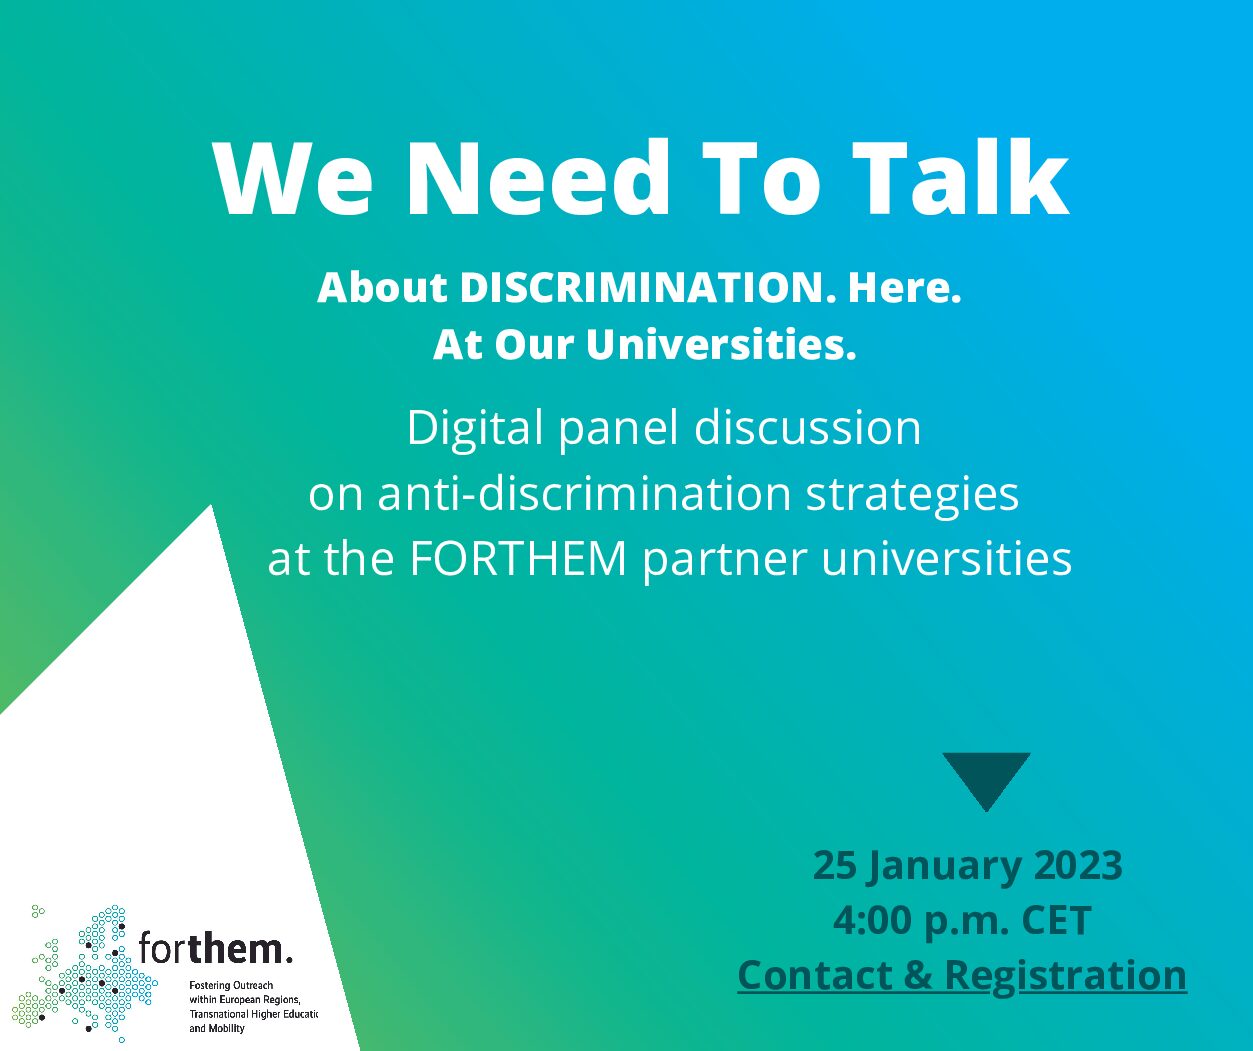 We Need To Talk About DISCRIMINATION. Here. At Our Universities